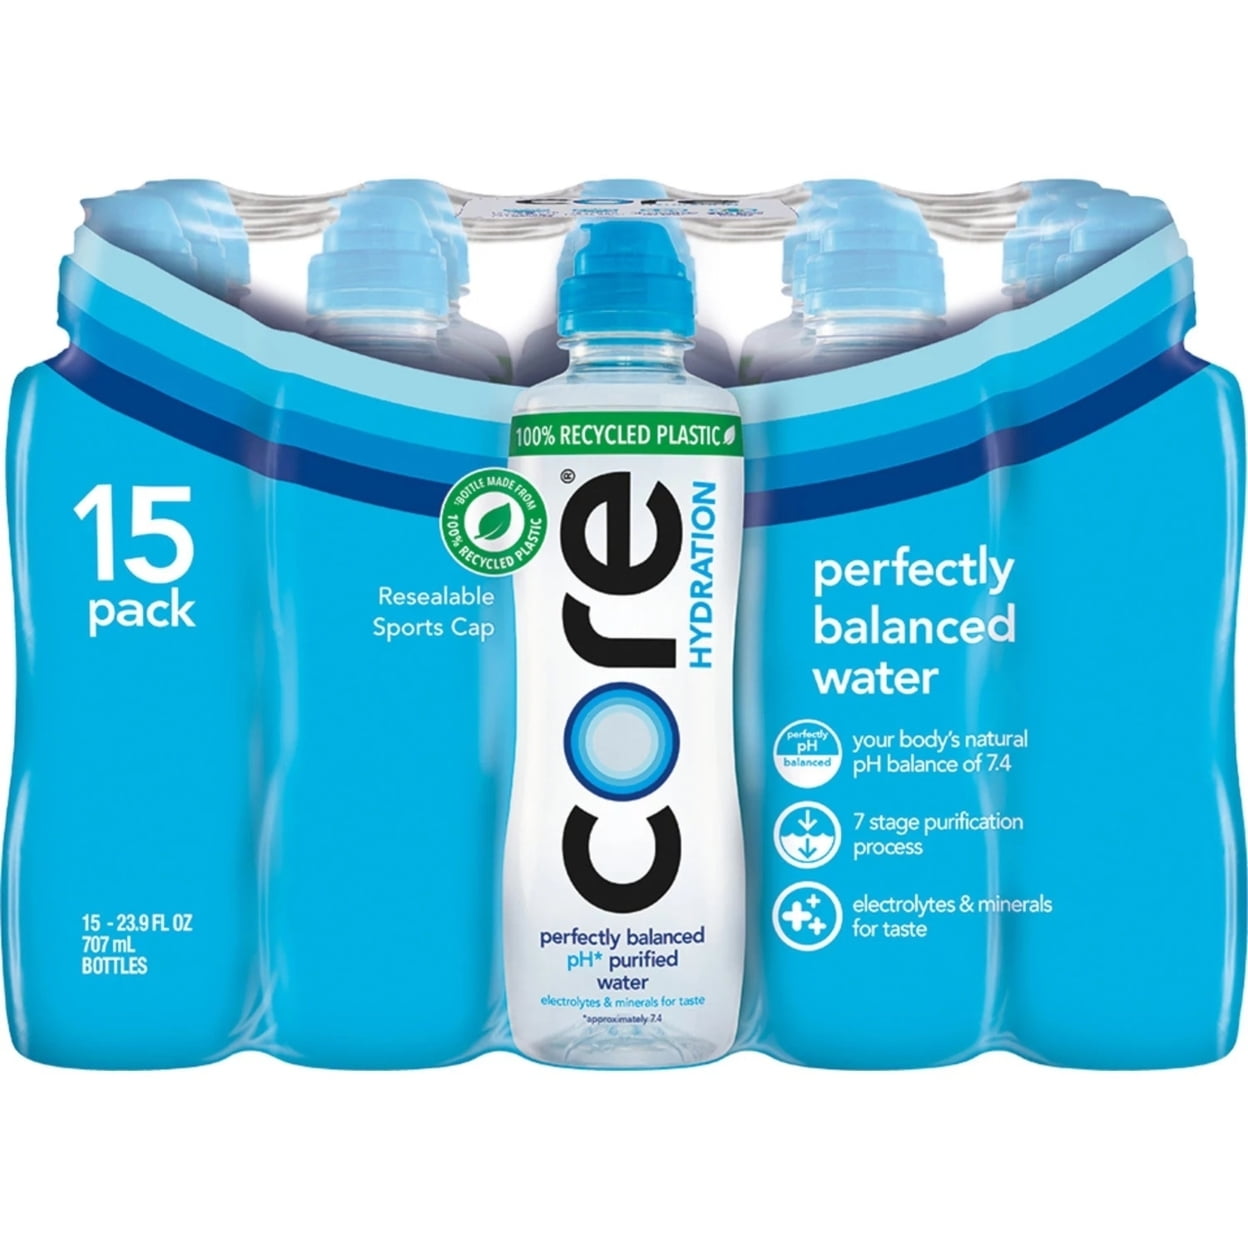 CORE Hydration Nutrient Enhanced Water, 23.9 Fluid Ounce (Pack of 15)